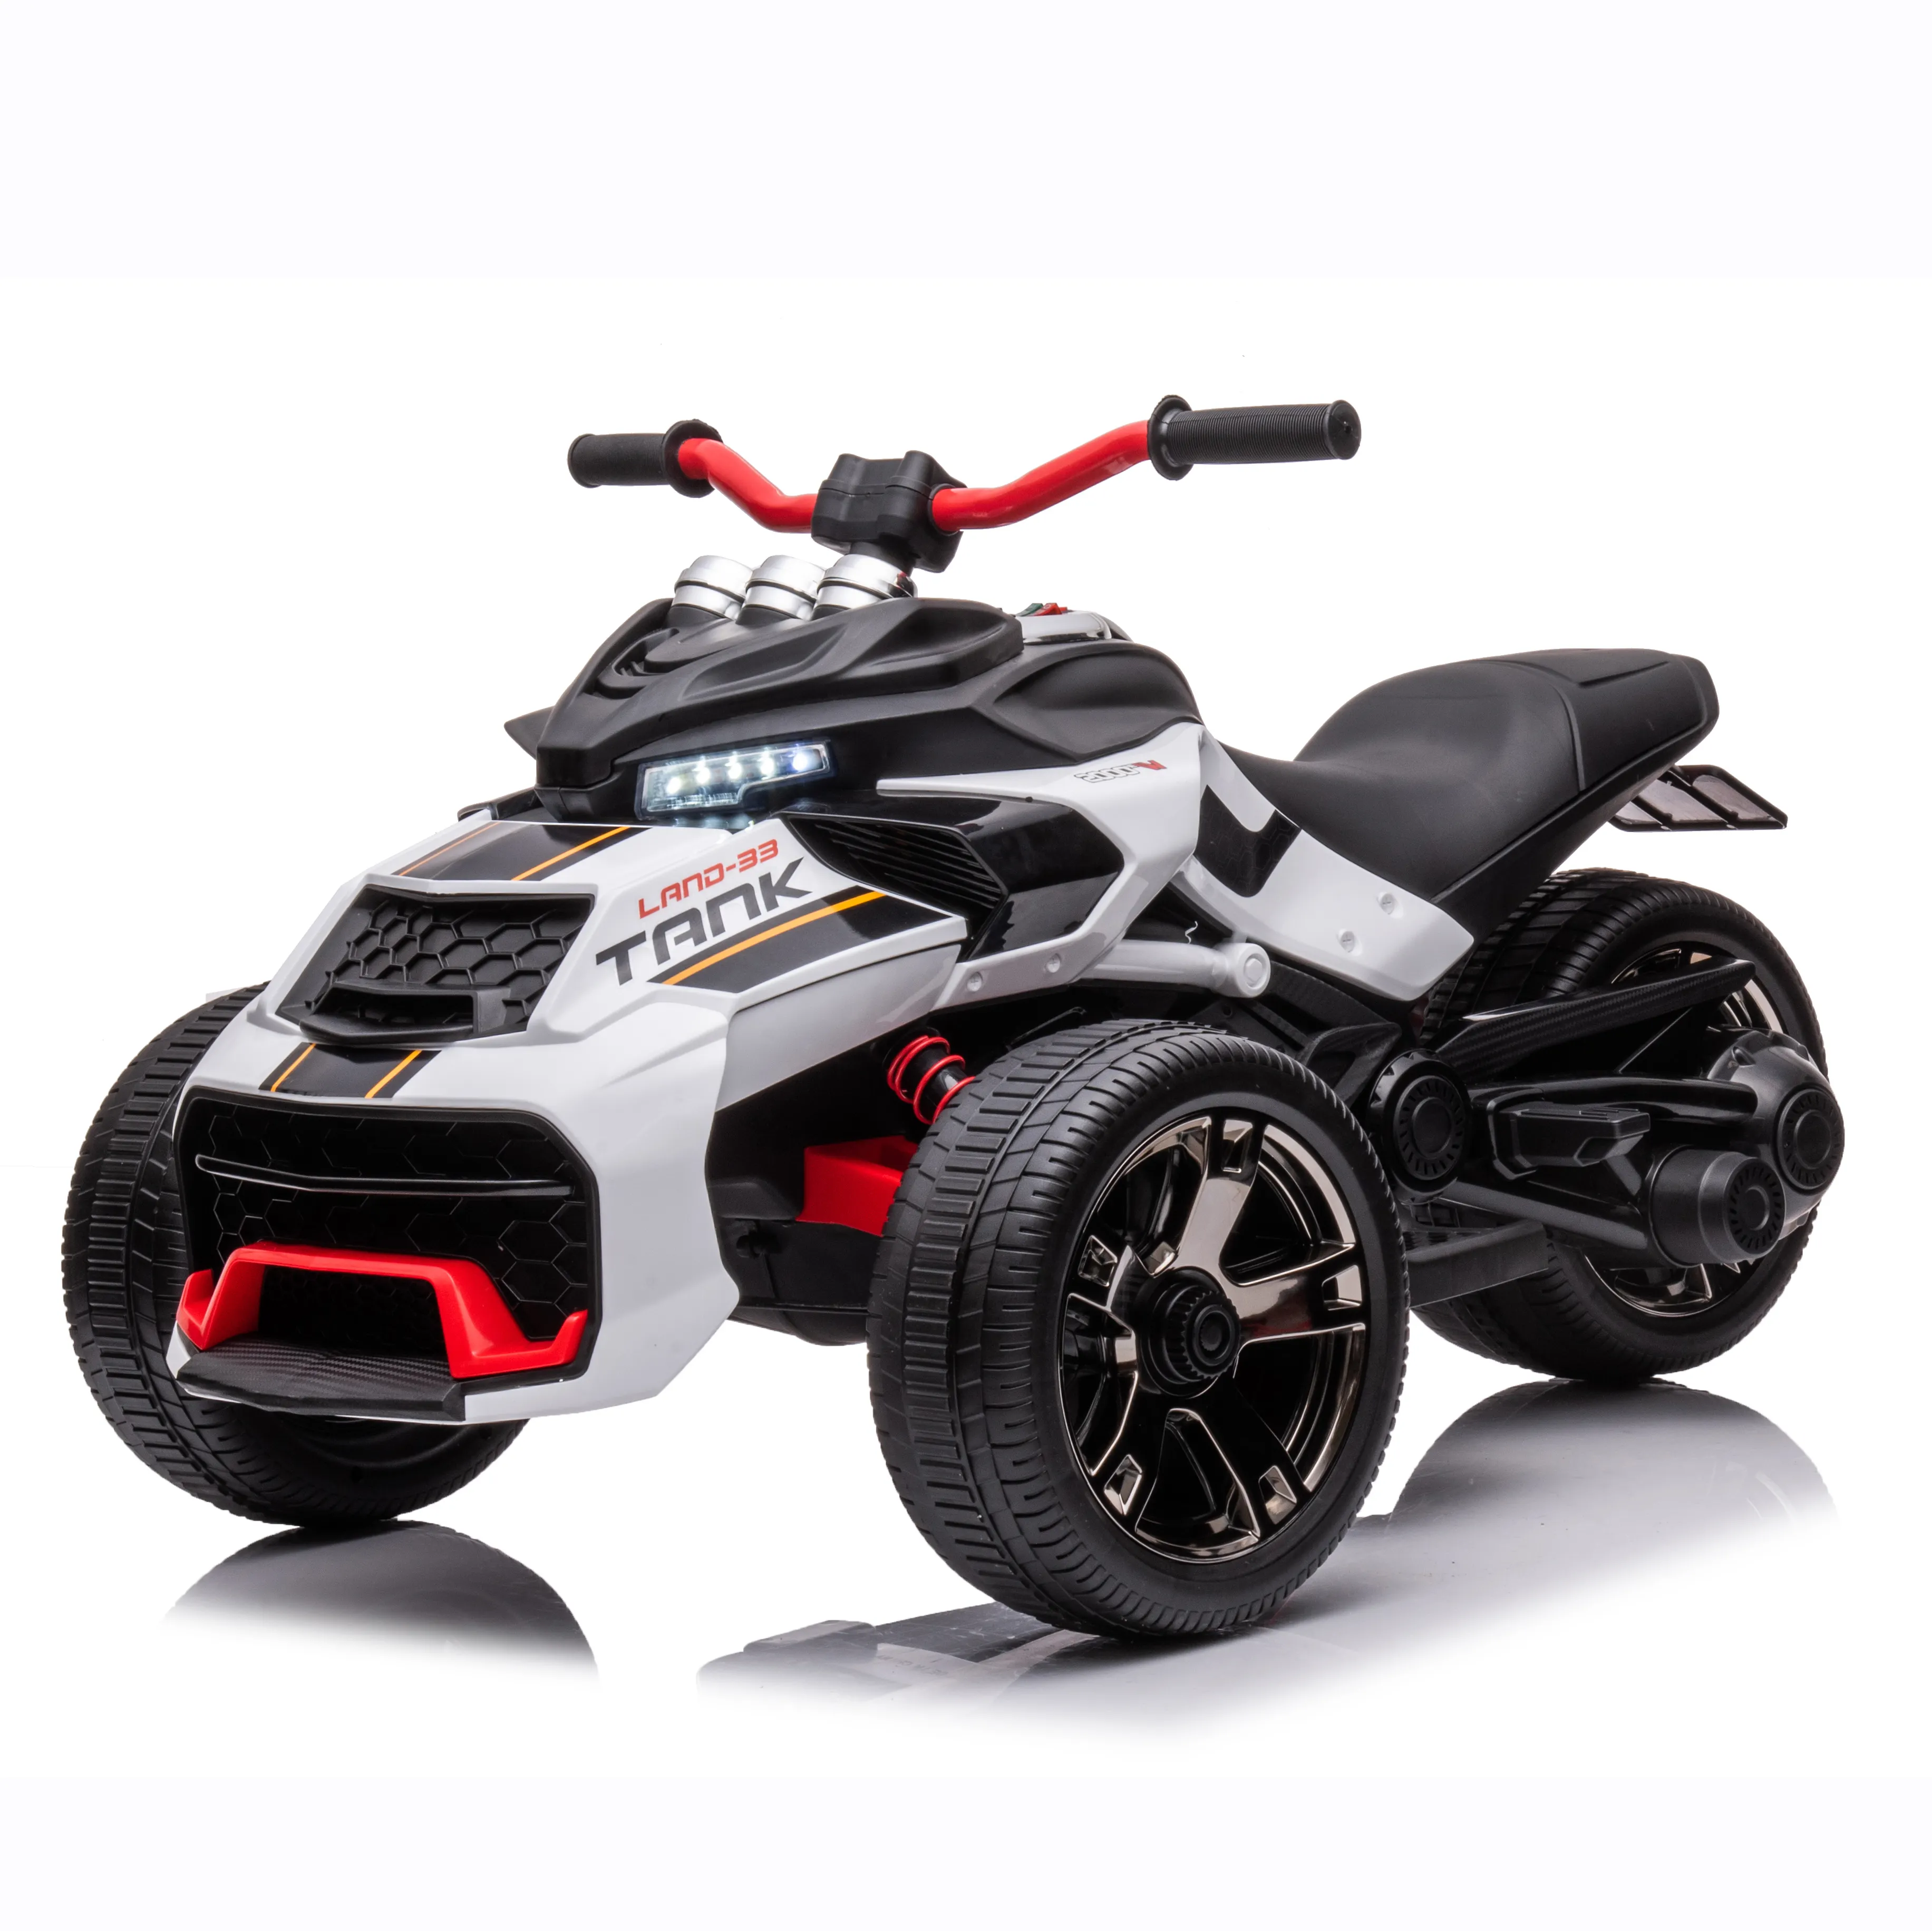 2022 latest large-volume children's toy, a 12V 3 wheel ride atv toy with a cool shape that can be driven and driven